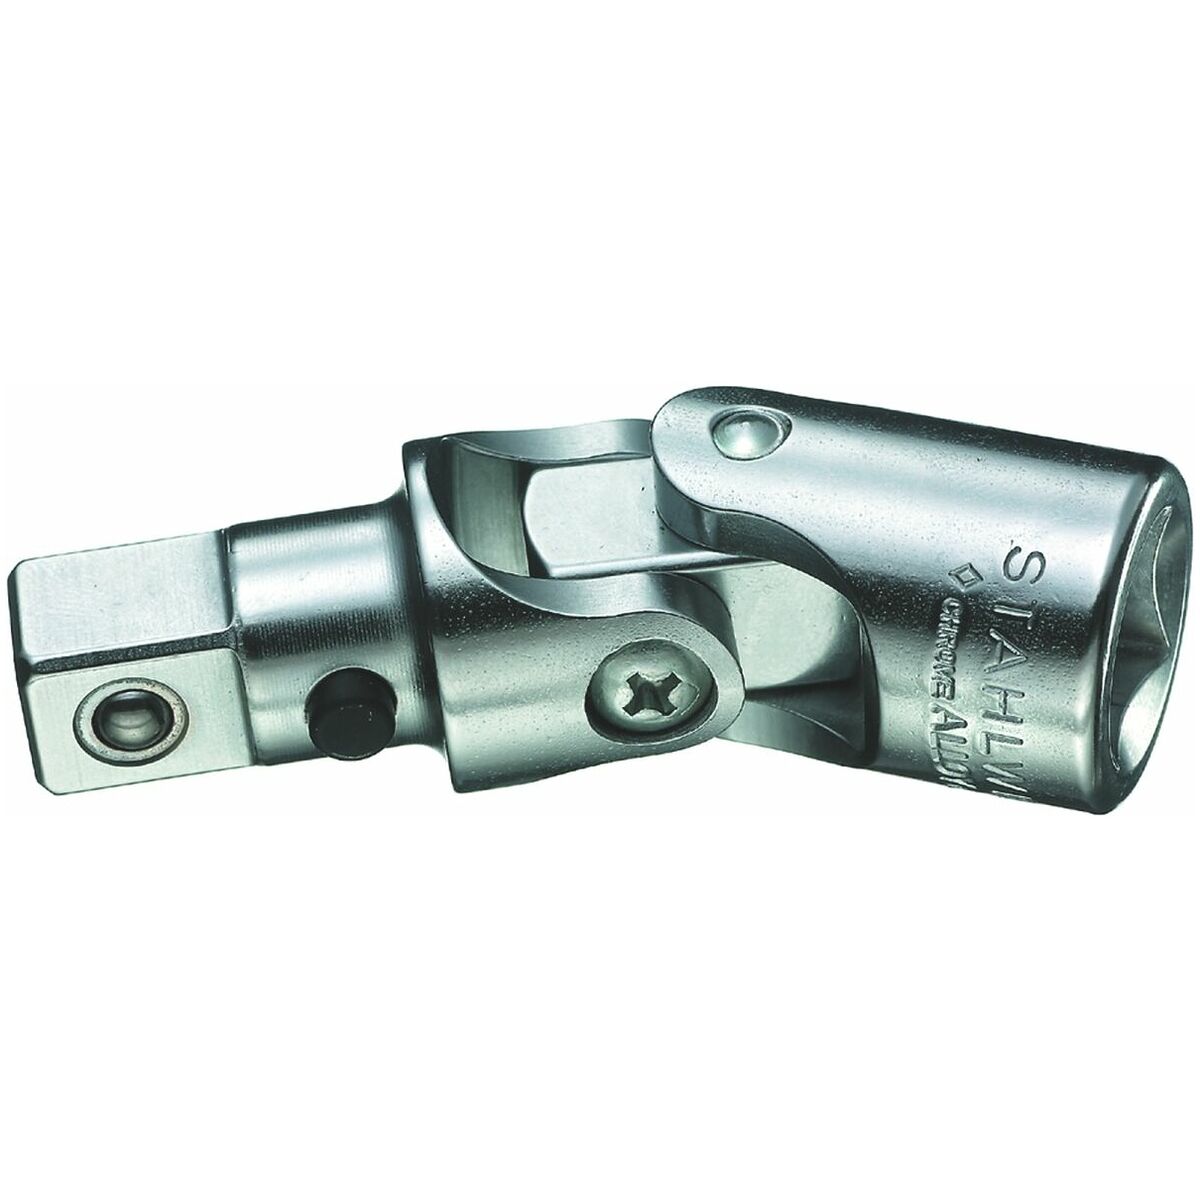 Simply buy Universal joint, 1/2 inch QuickRelease 1/2